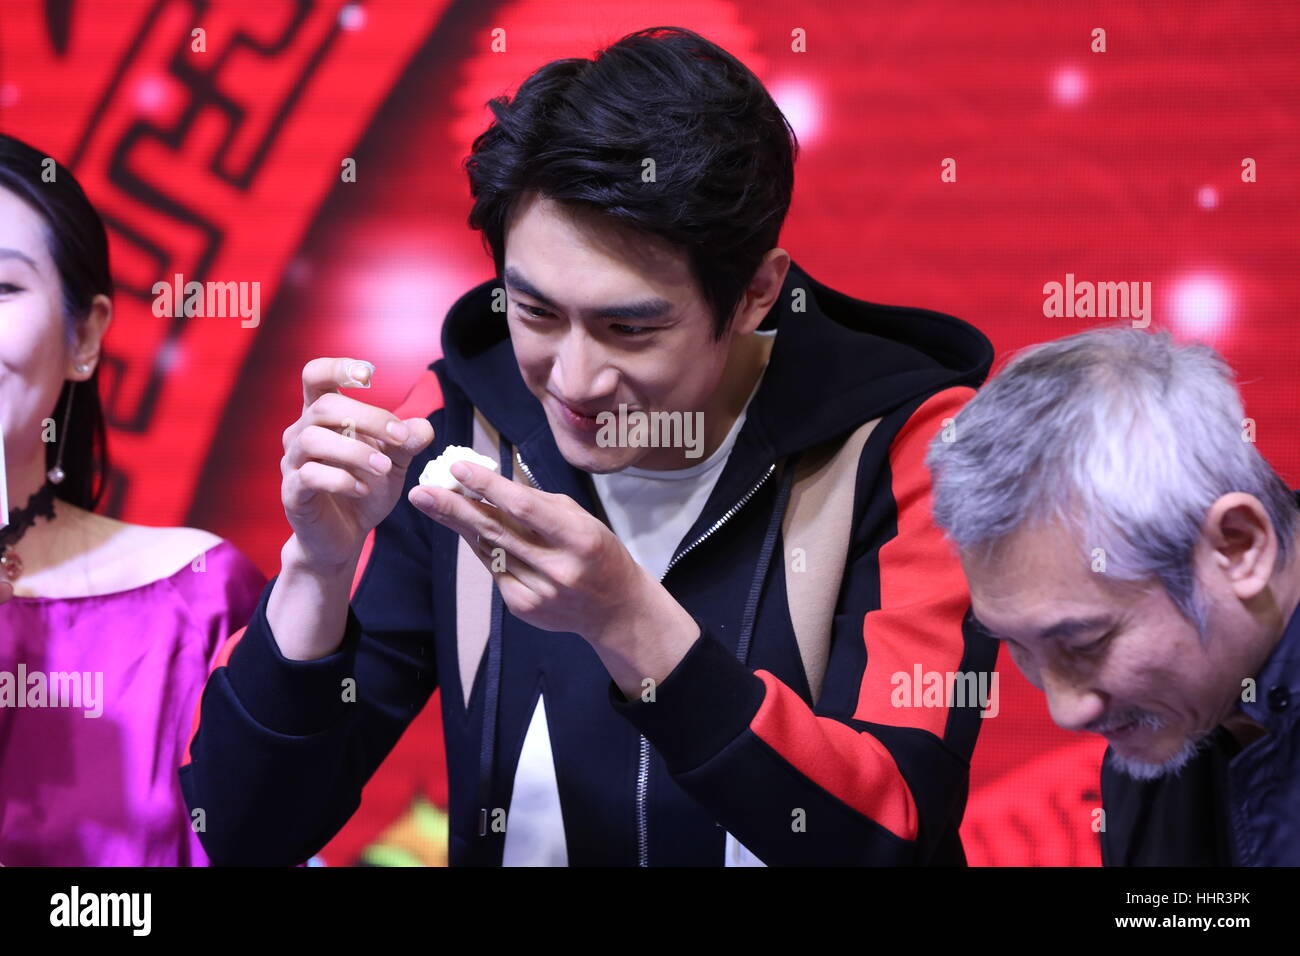 Shenyan, Shenyan, China. 20th Jan, 2017. Shenyang, CHINA-January 20 2017: (EDITORIAL USE ONLY. CHINA OUT) Chinese actor Lin Gengxin makes dumplings during the promotional event.Chinese famous film director Tsui Hark and actor Lin Gengxin promote their latest film 'Journey to the West: The Demons Strike Back' in Shenyang, capital of northeast China's Liaoning Province, January 20th, 2017. Credit: SIPA Asia/ZUMA Wire/Alamy Live News Stock Photo